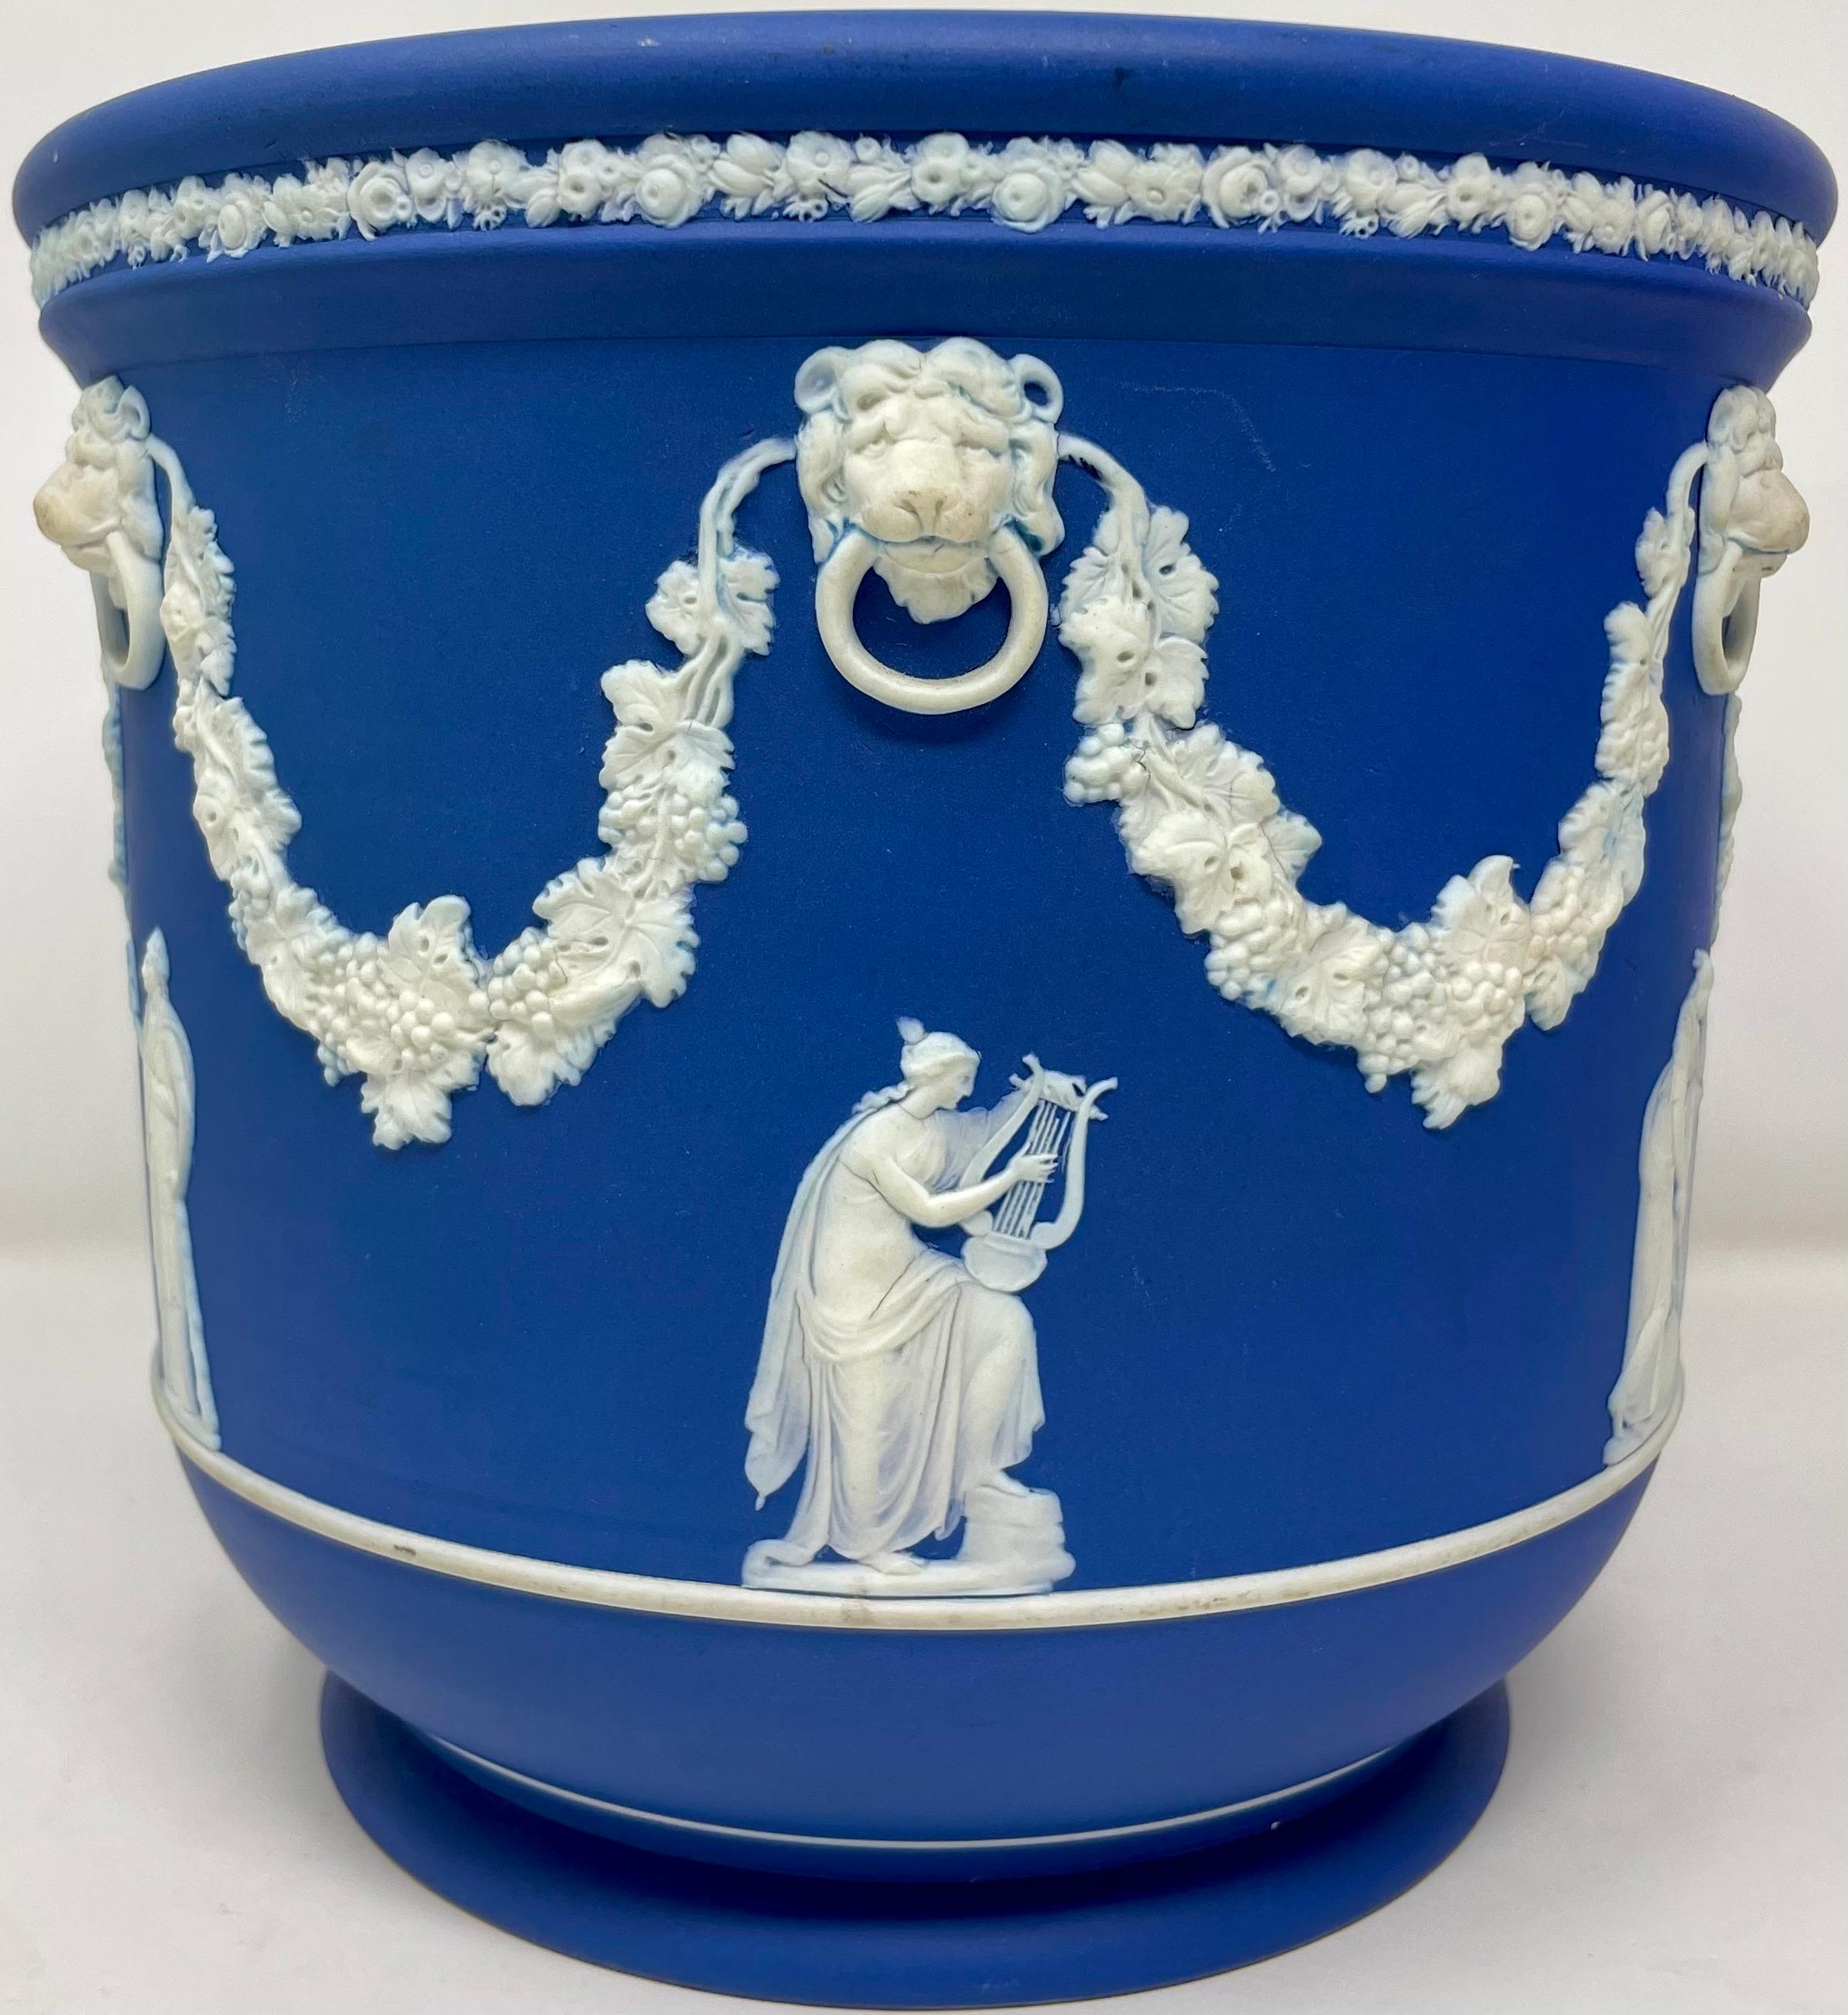 Pair Antique English Blue and White Wedgwood Porcelain Planters, Circa 1890-1900.